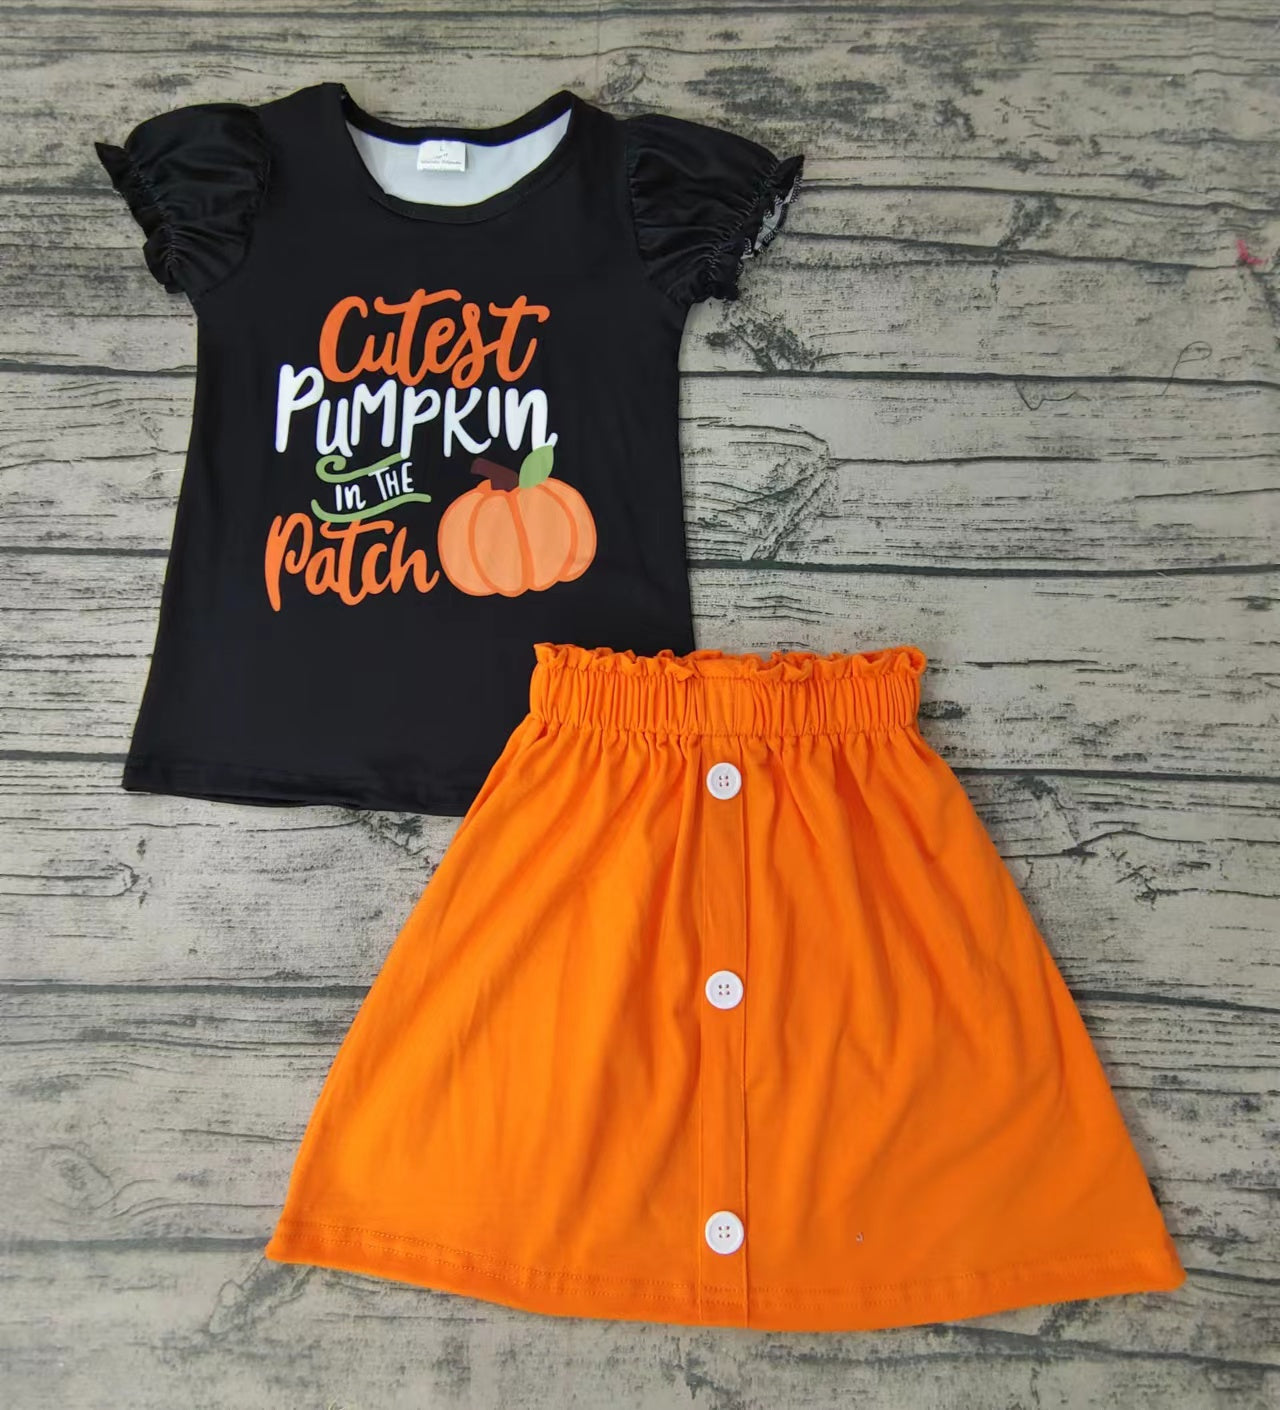 Cutest pumpkin in the patch baby girls black top skirt sets